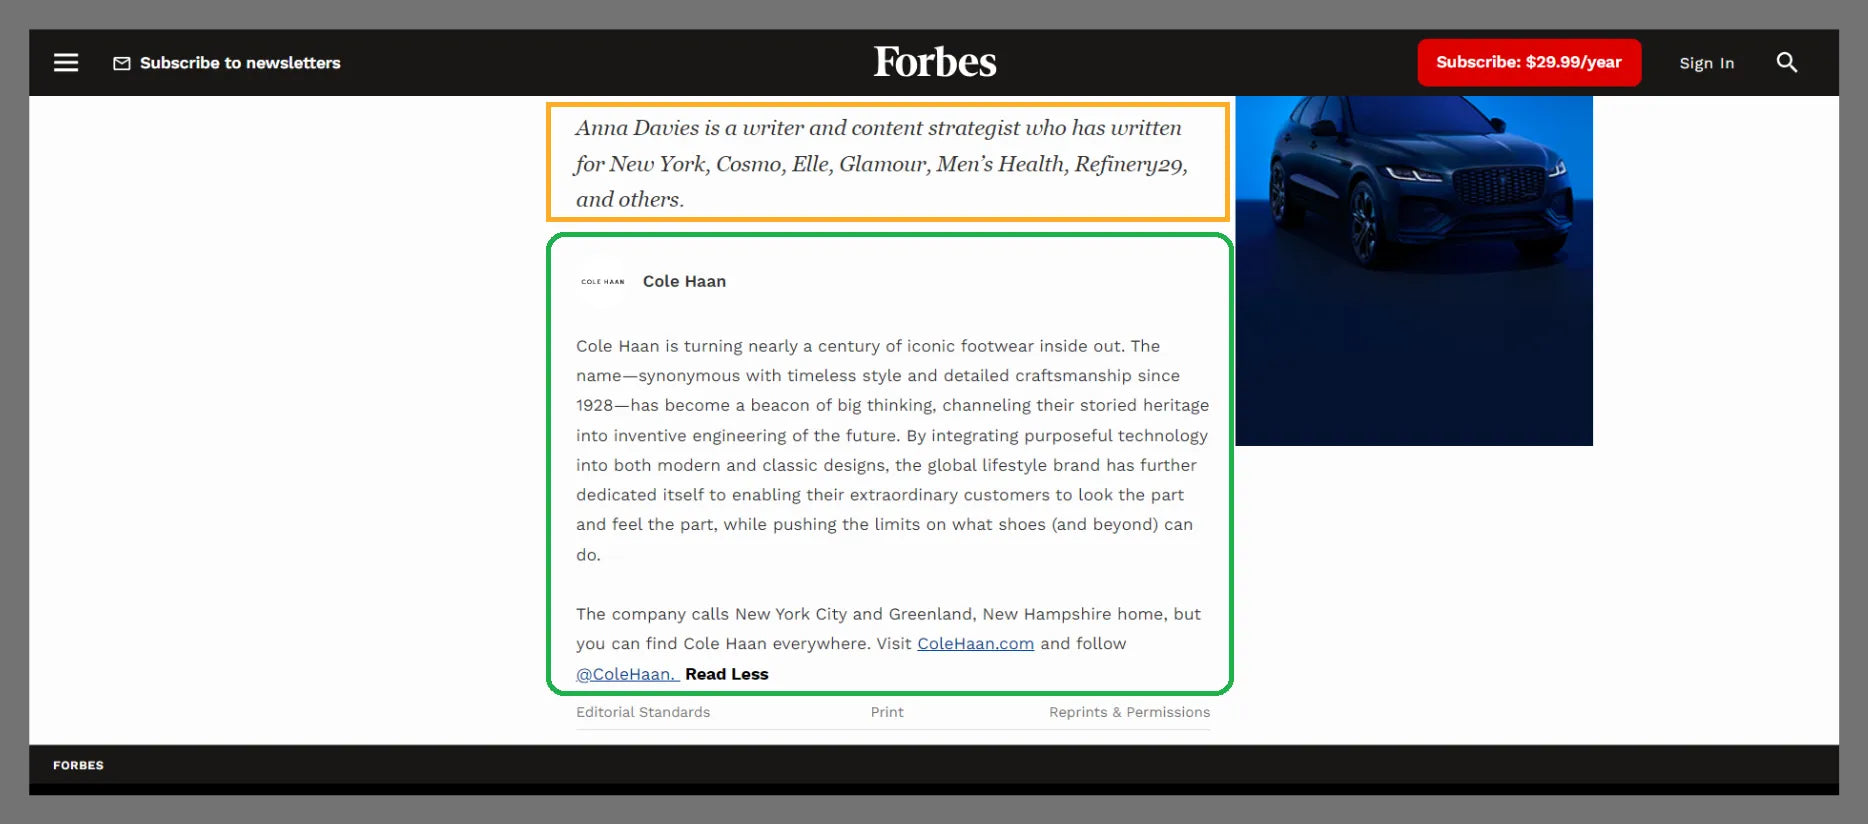 An advertorial on Forbes